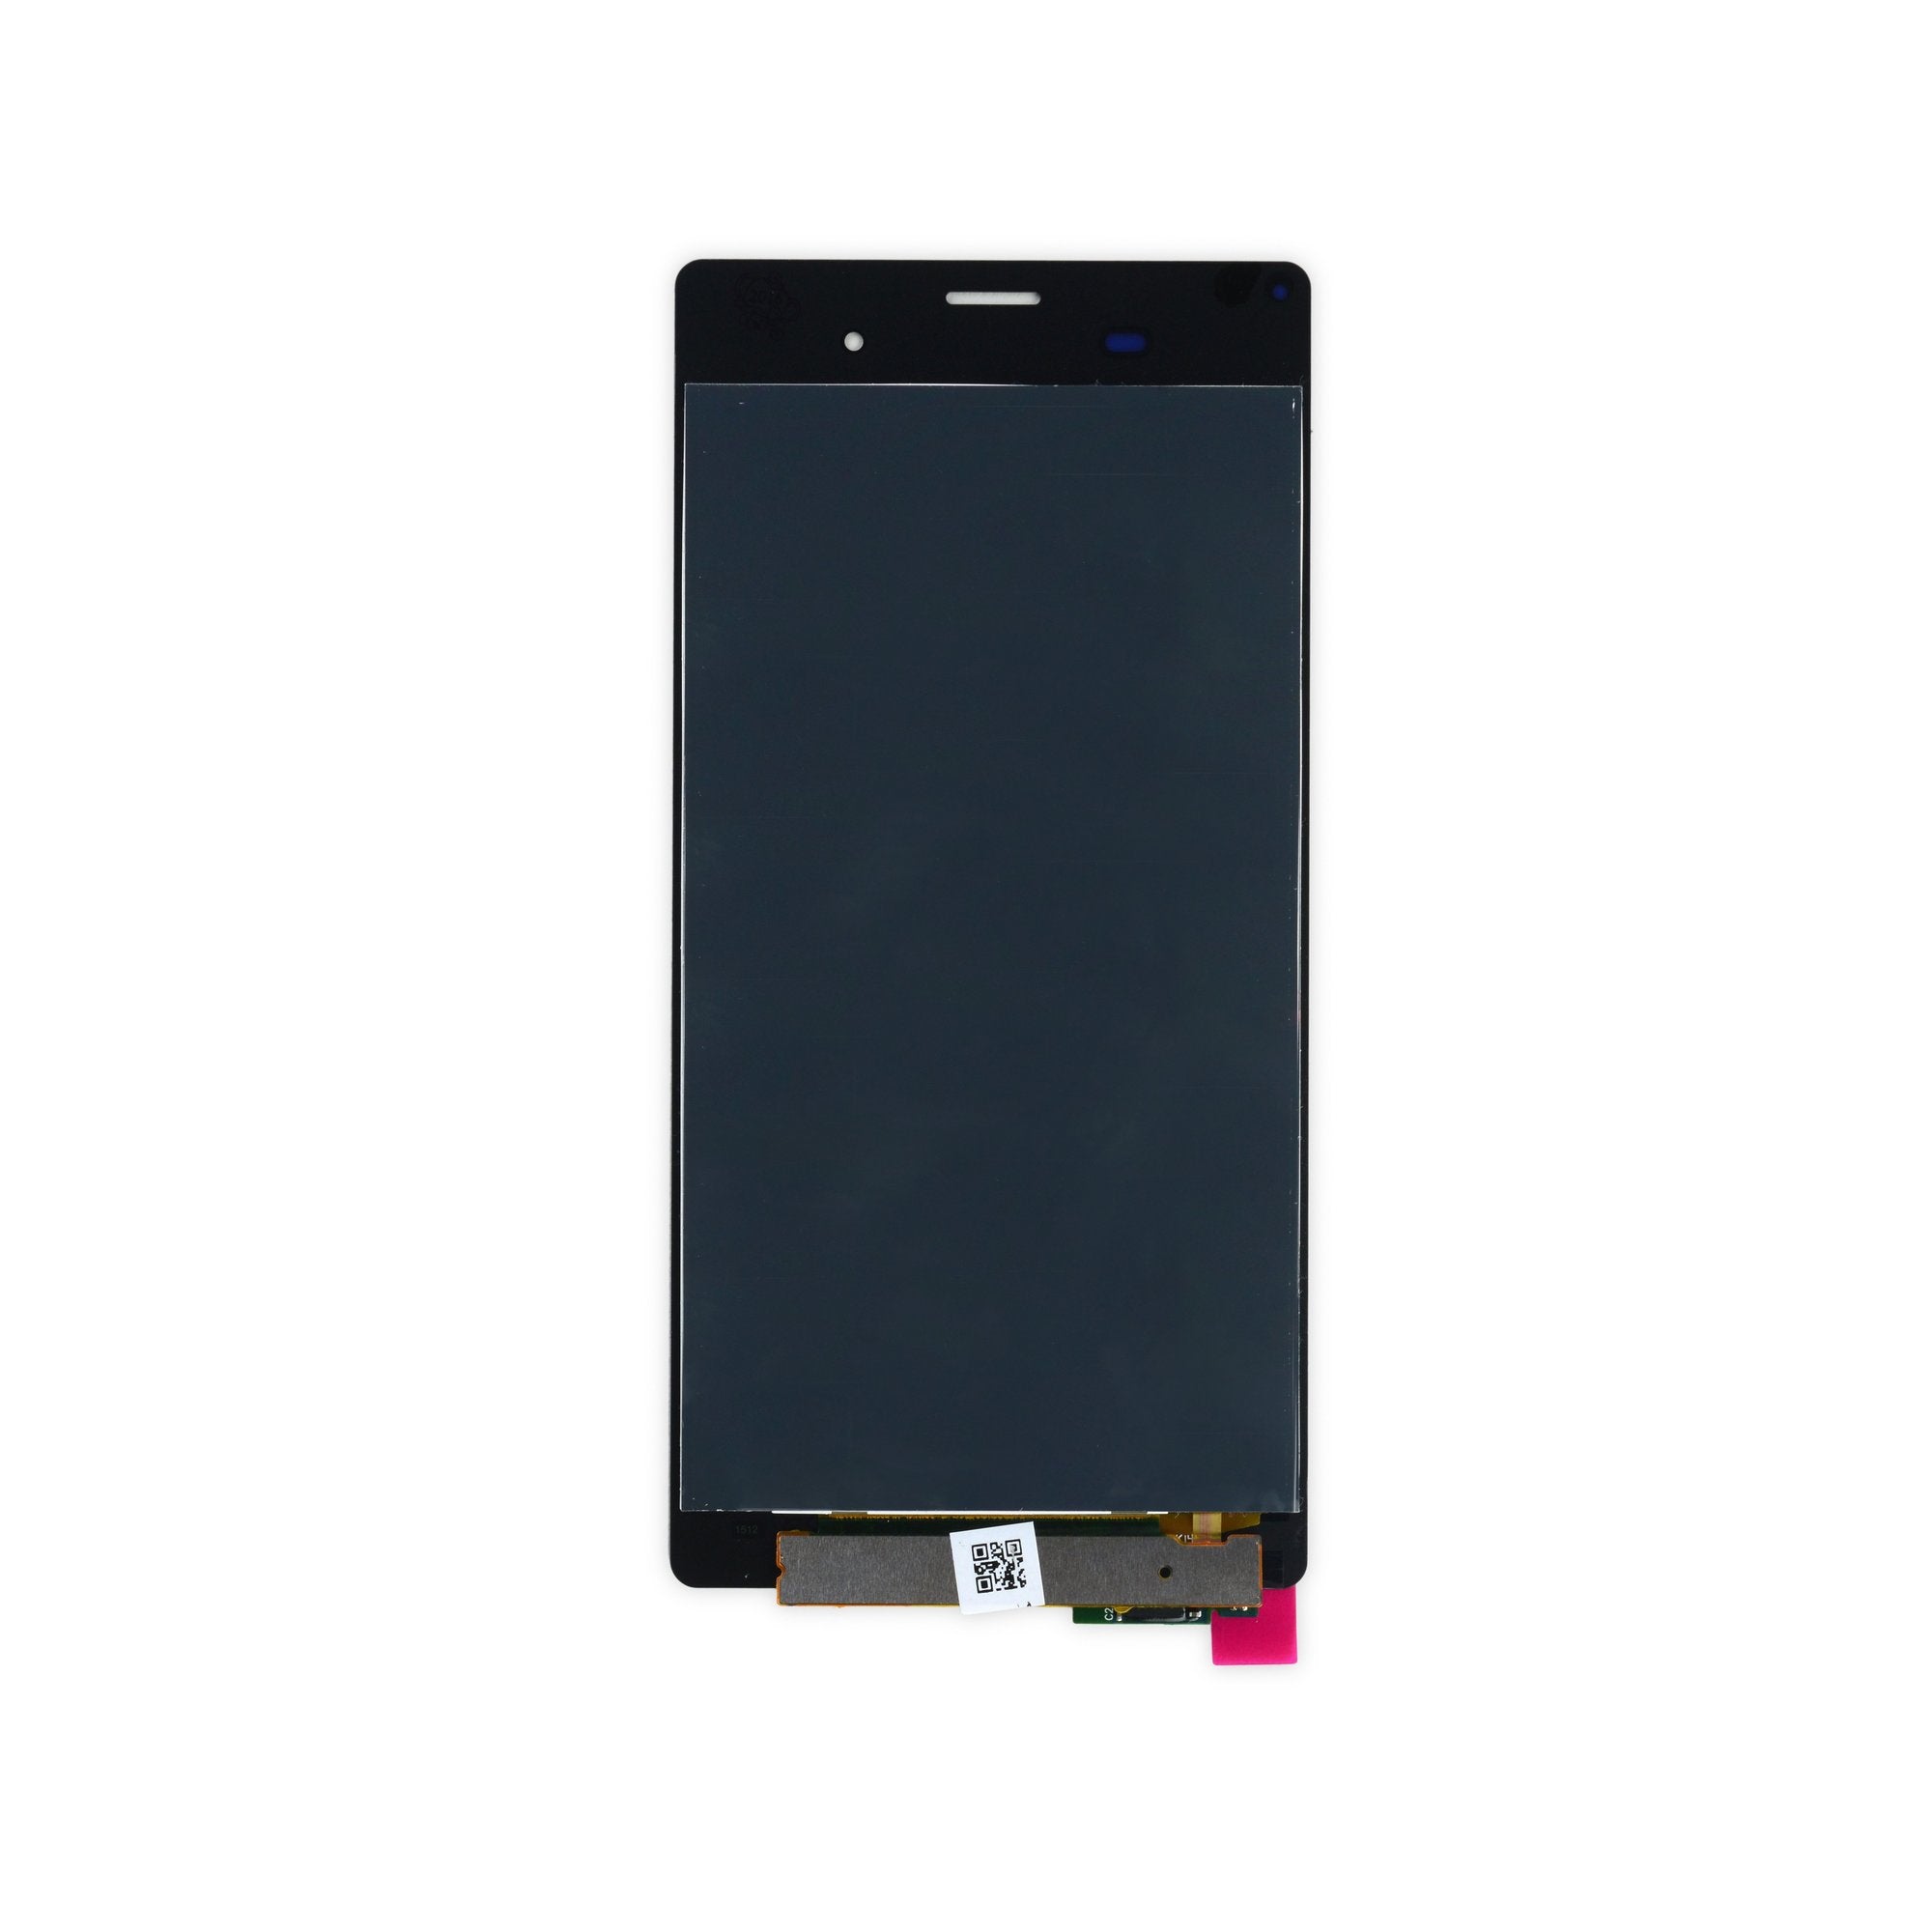 Sony Xperia Z3 and Z3 Dual Screen Black New Part Only